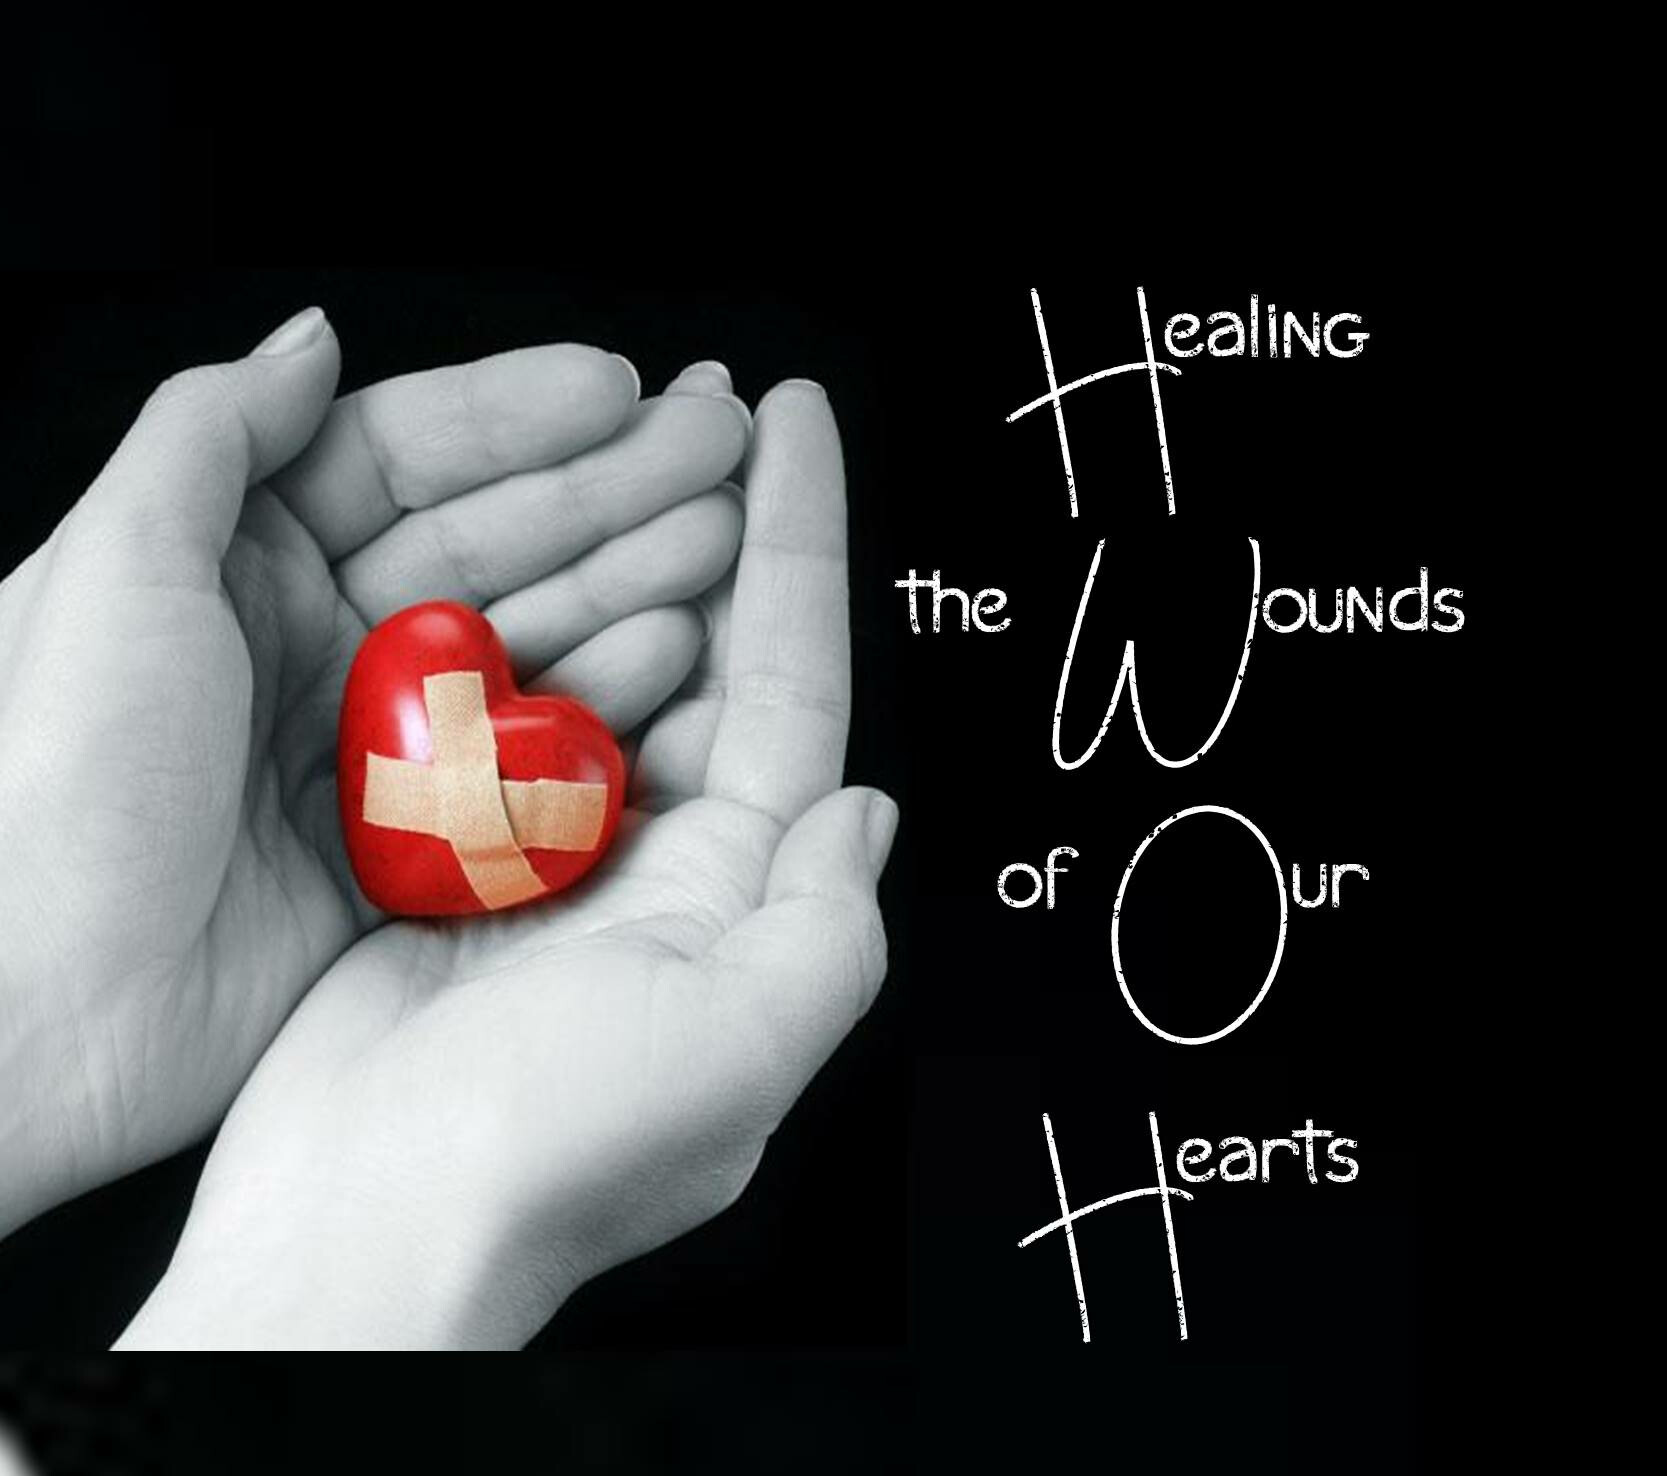 HEALING THE WOUNDS OF OUR HEARTS